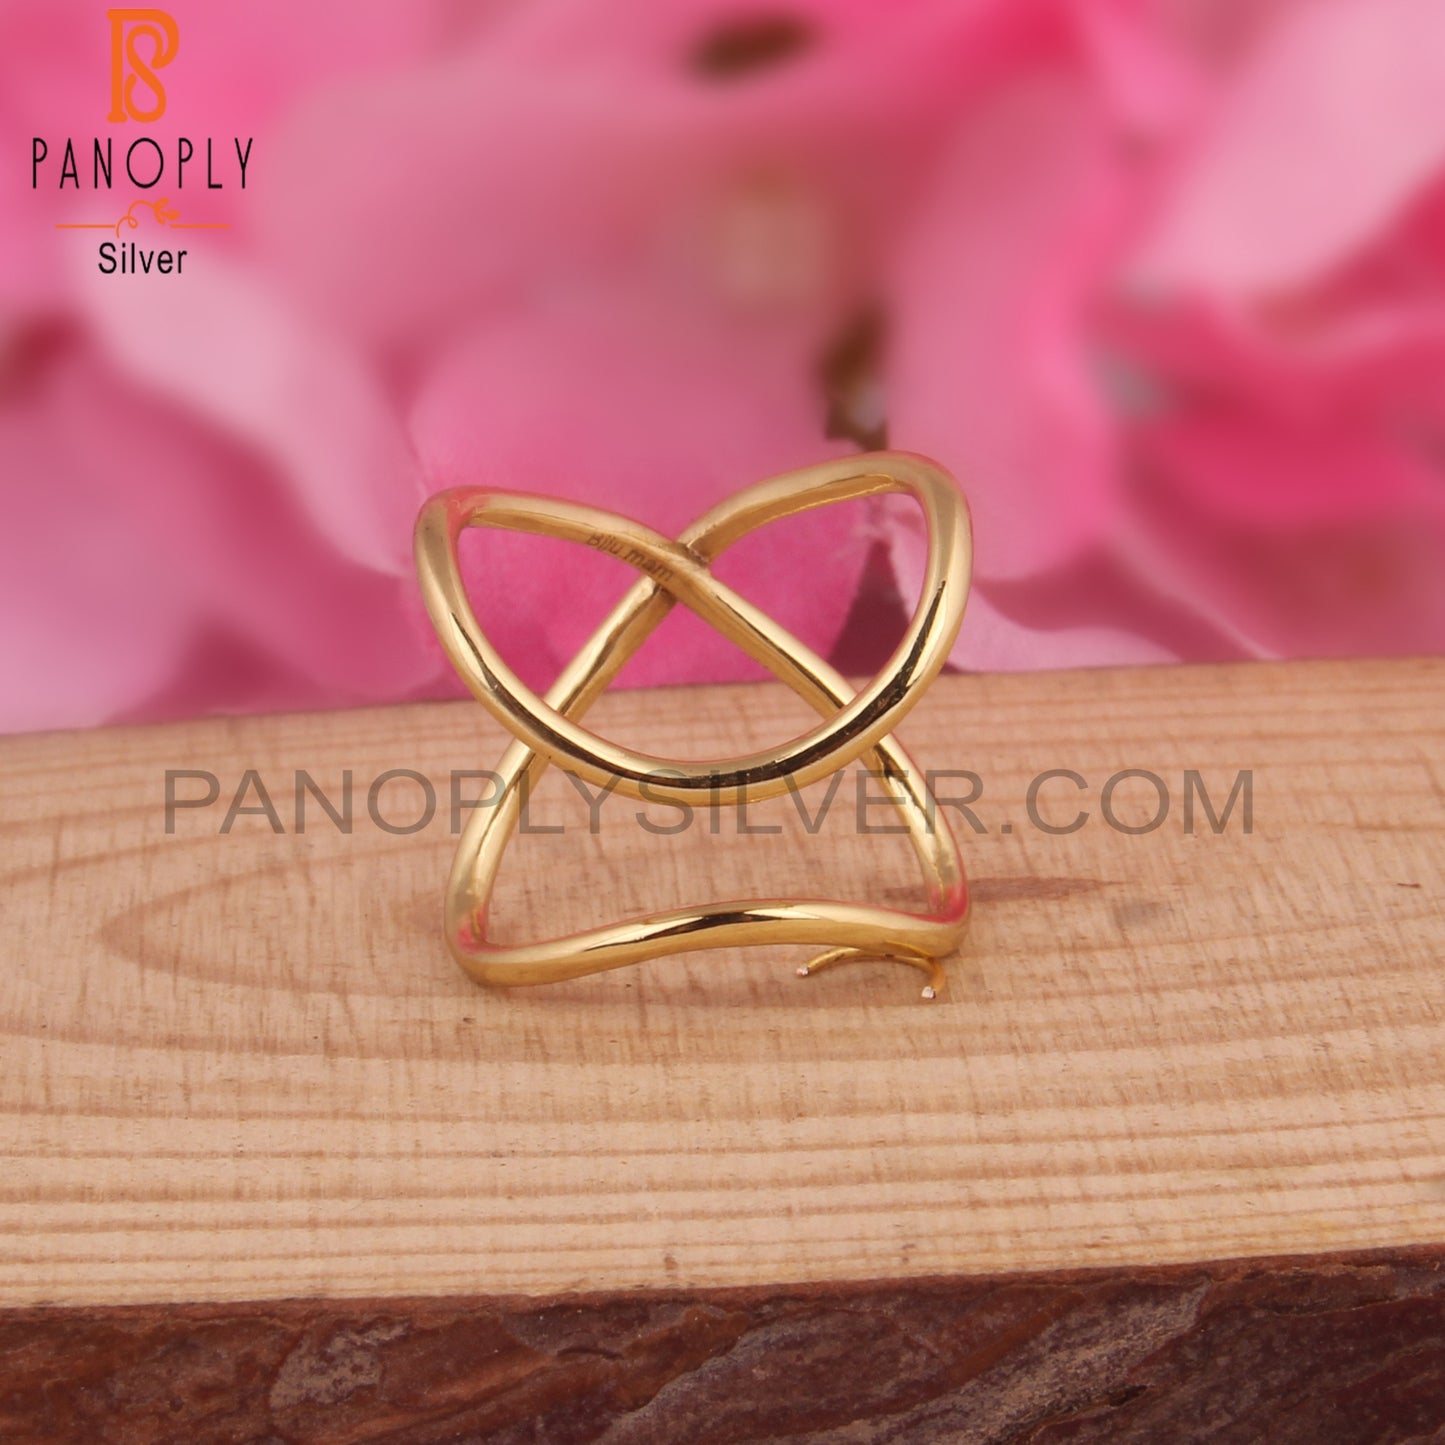 Cress Cross Gold Stackable Rings Gifts